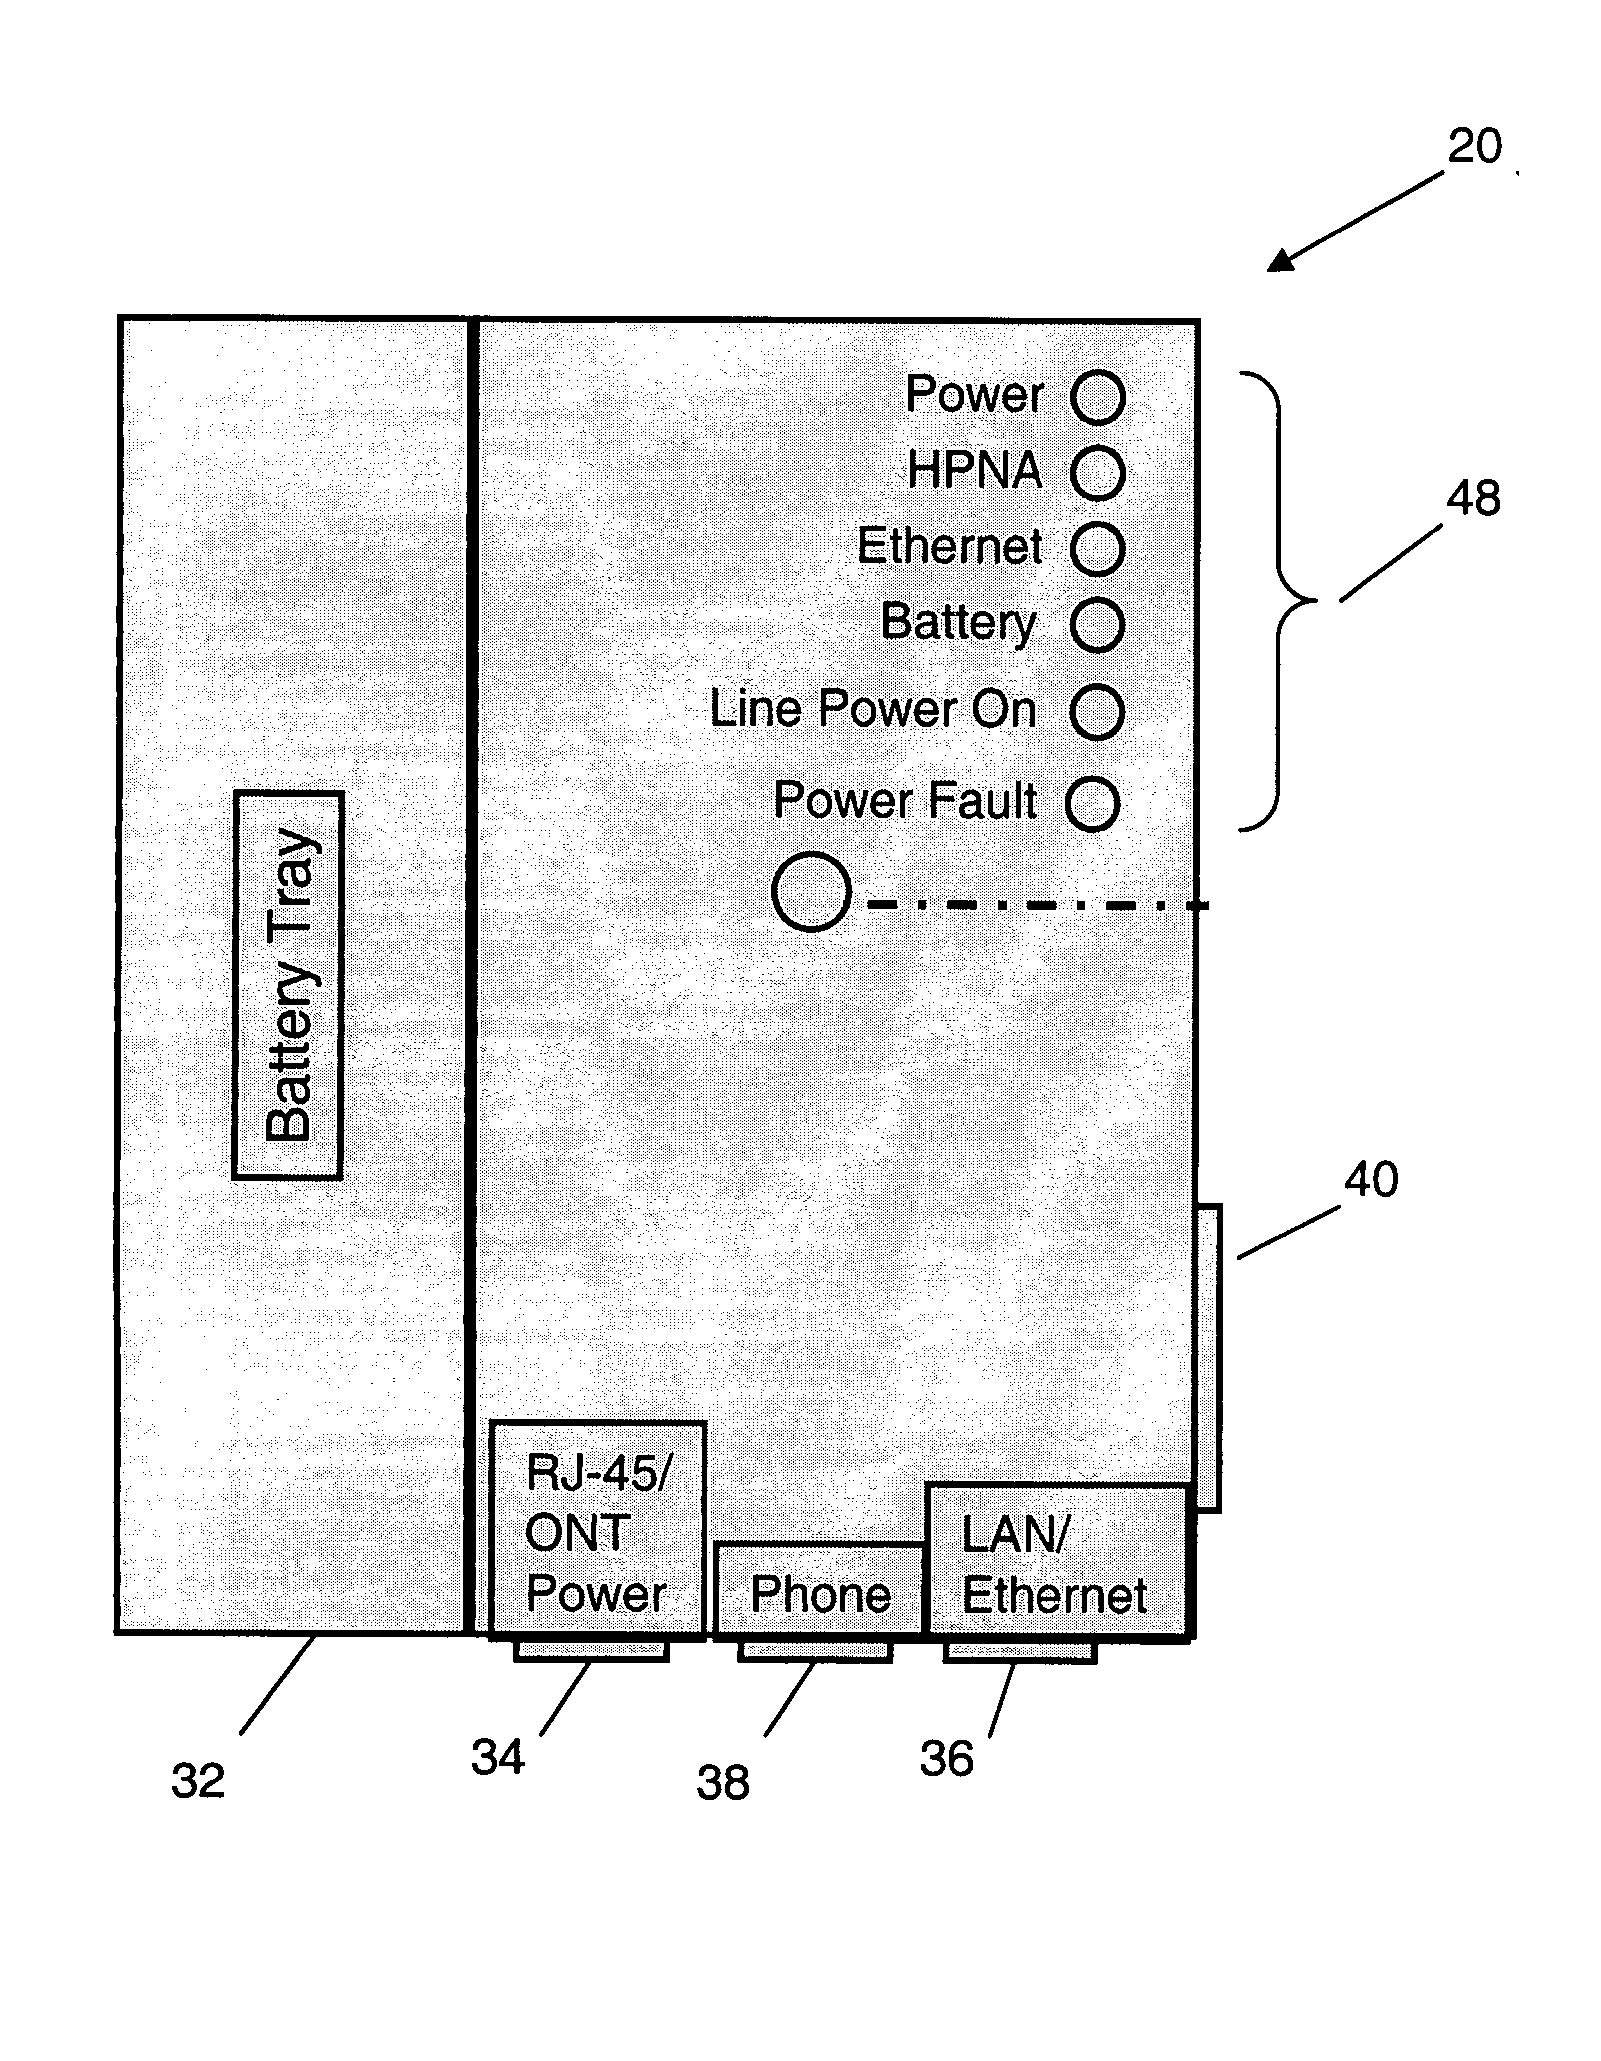 Power adapter and broadband line extender system and method